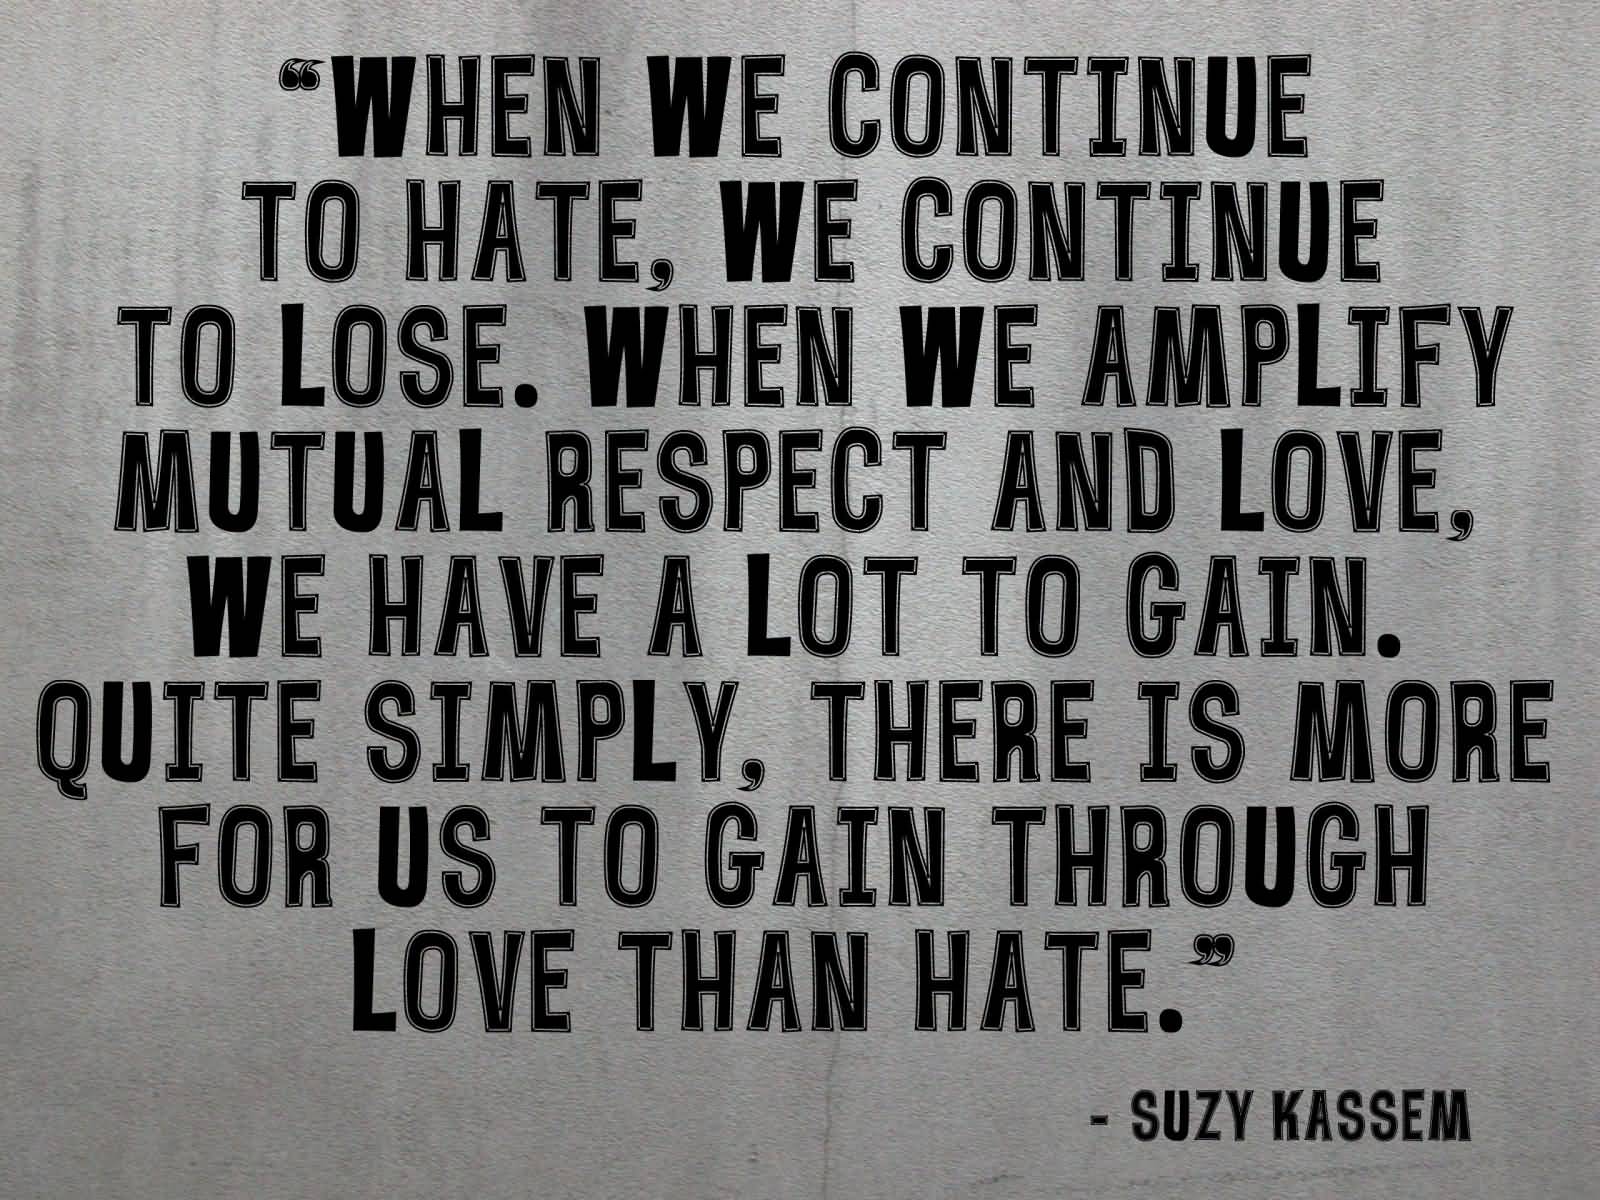 When we continue to hate, we continue to lose. When we amplify mutual respect and love, we have a lot to gain. Quite simply, there is more for us to gain through love than hate.